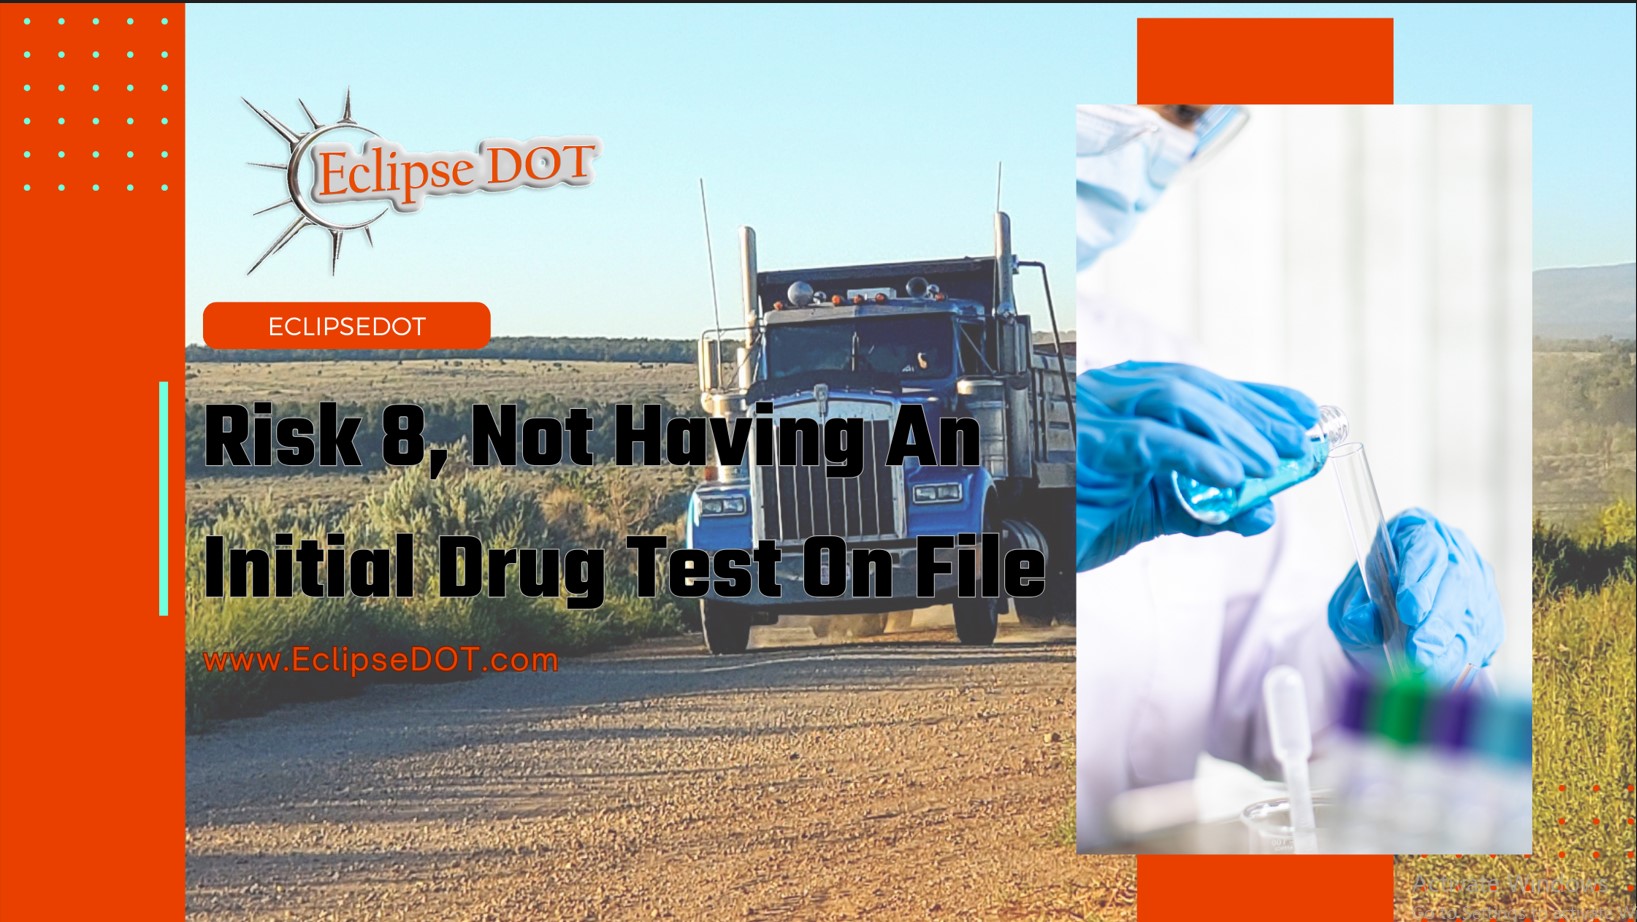 A magnifying glass over a document titled "Drug Test Results" symbolizes the significance of Risk 8.